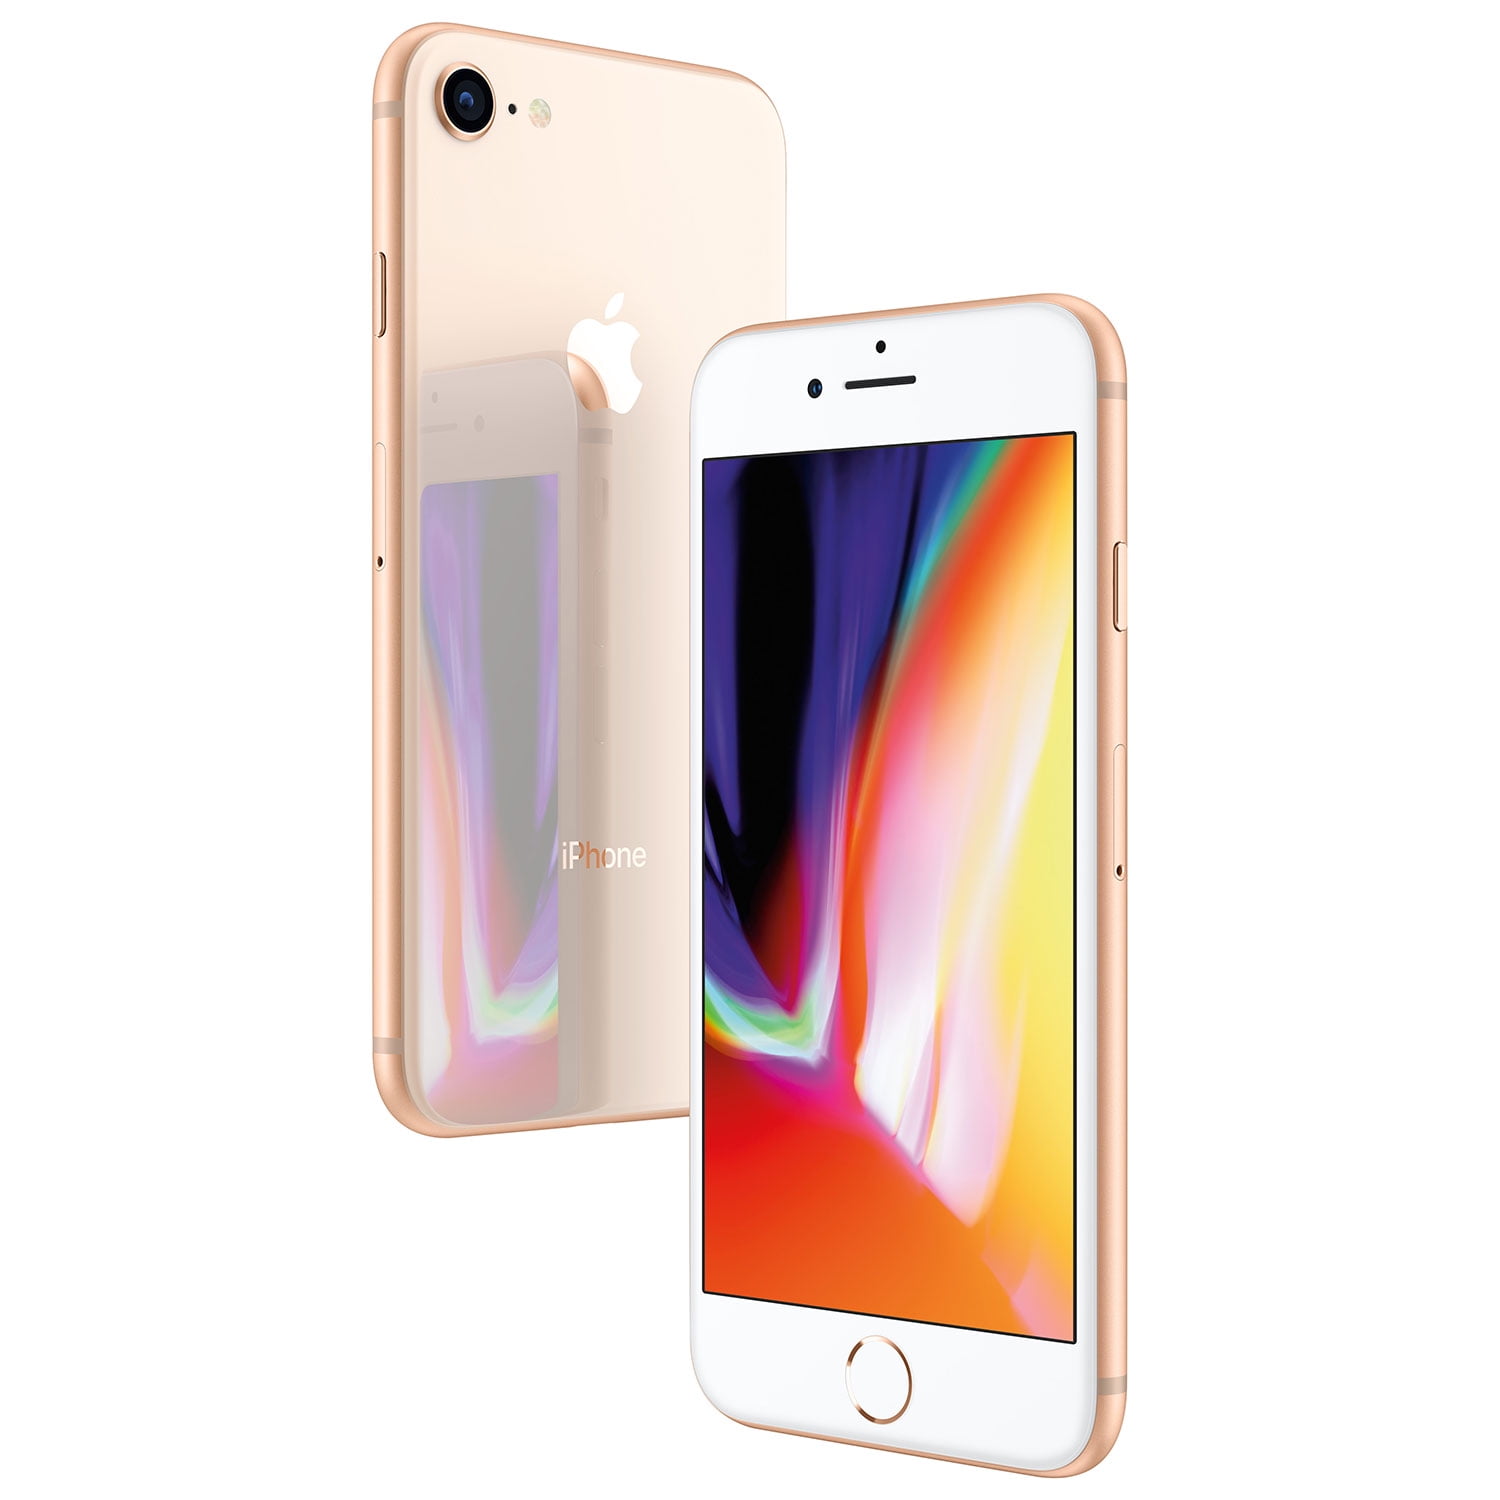 Apple Iphone 8 64gb Smartphone Gold Unlocked Certified Pre Owned